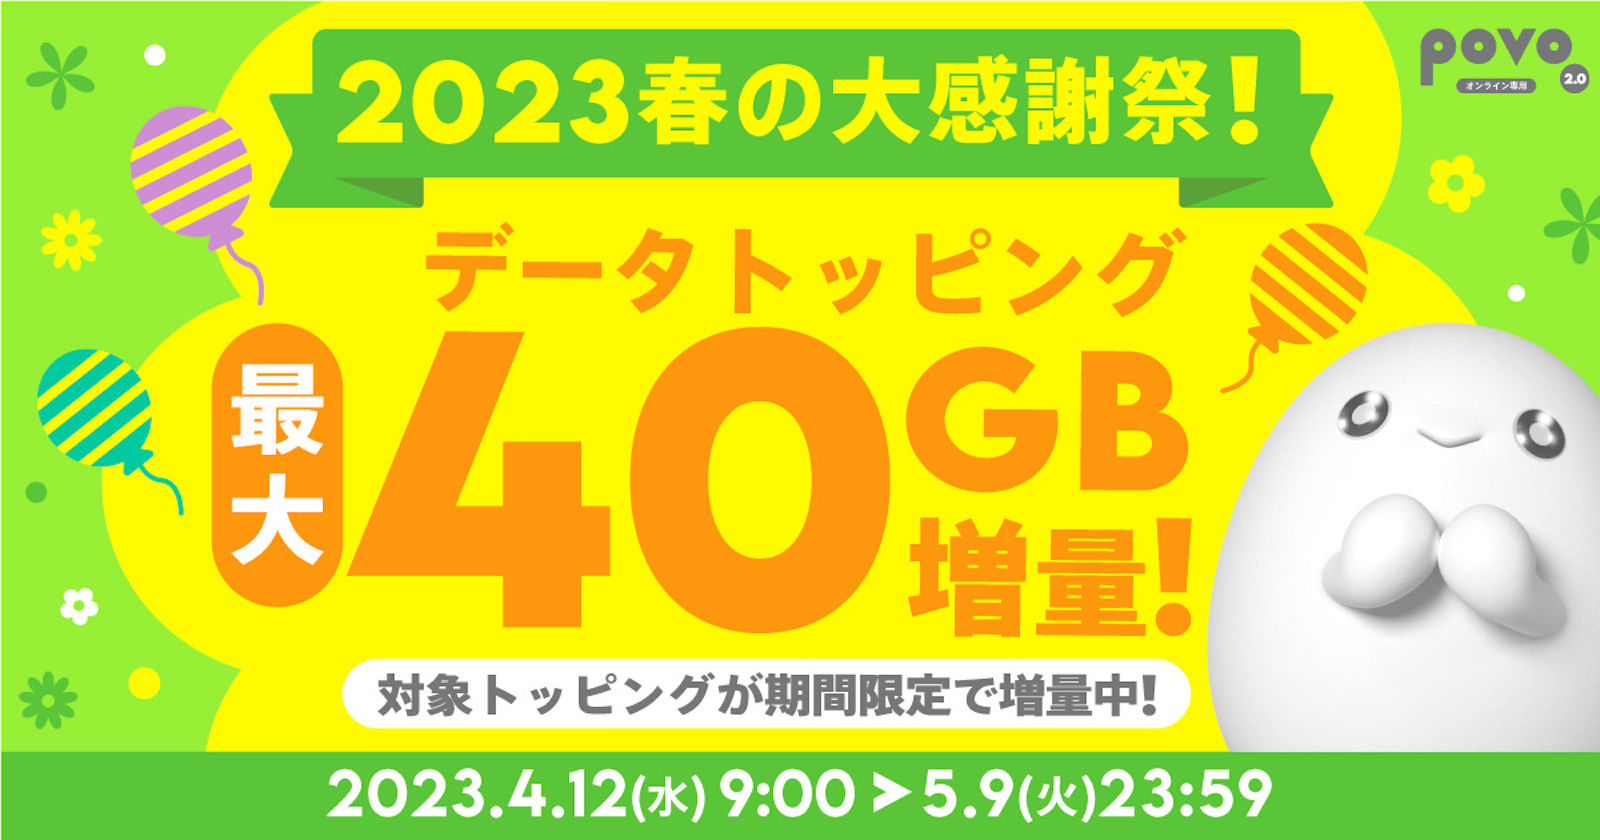 Data Topping campaign 2023 60gb 150gb